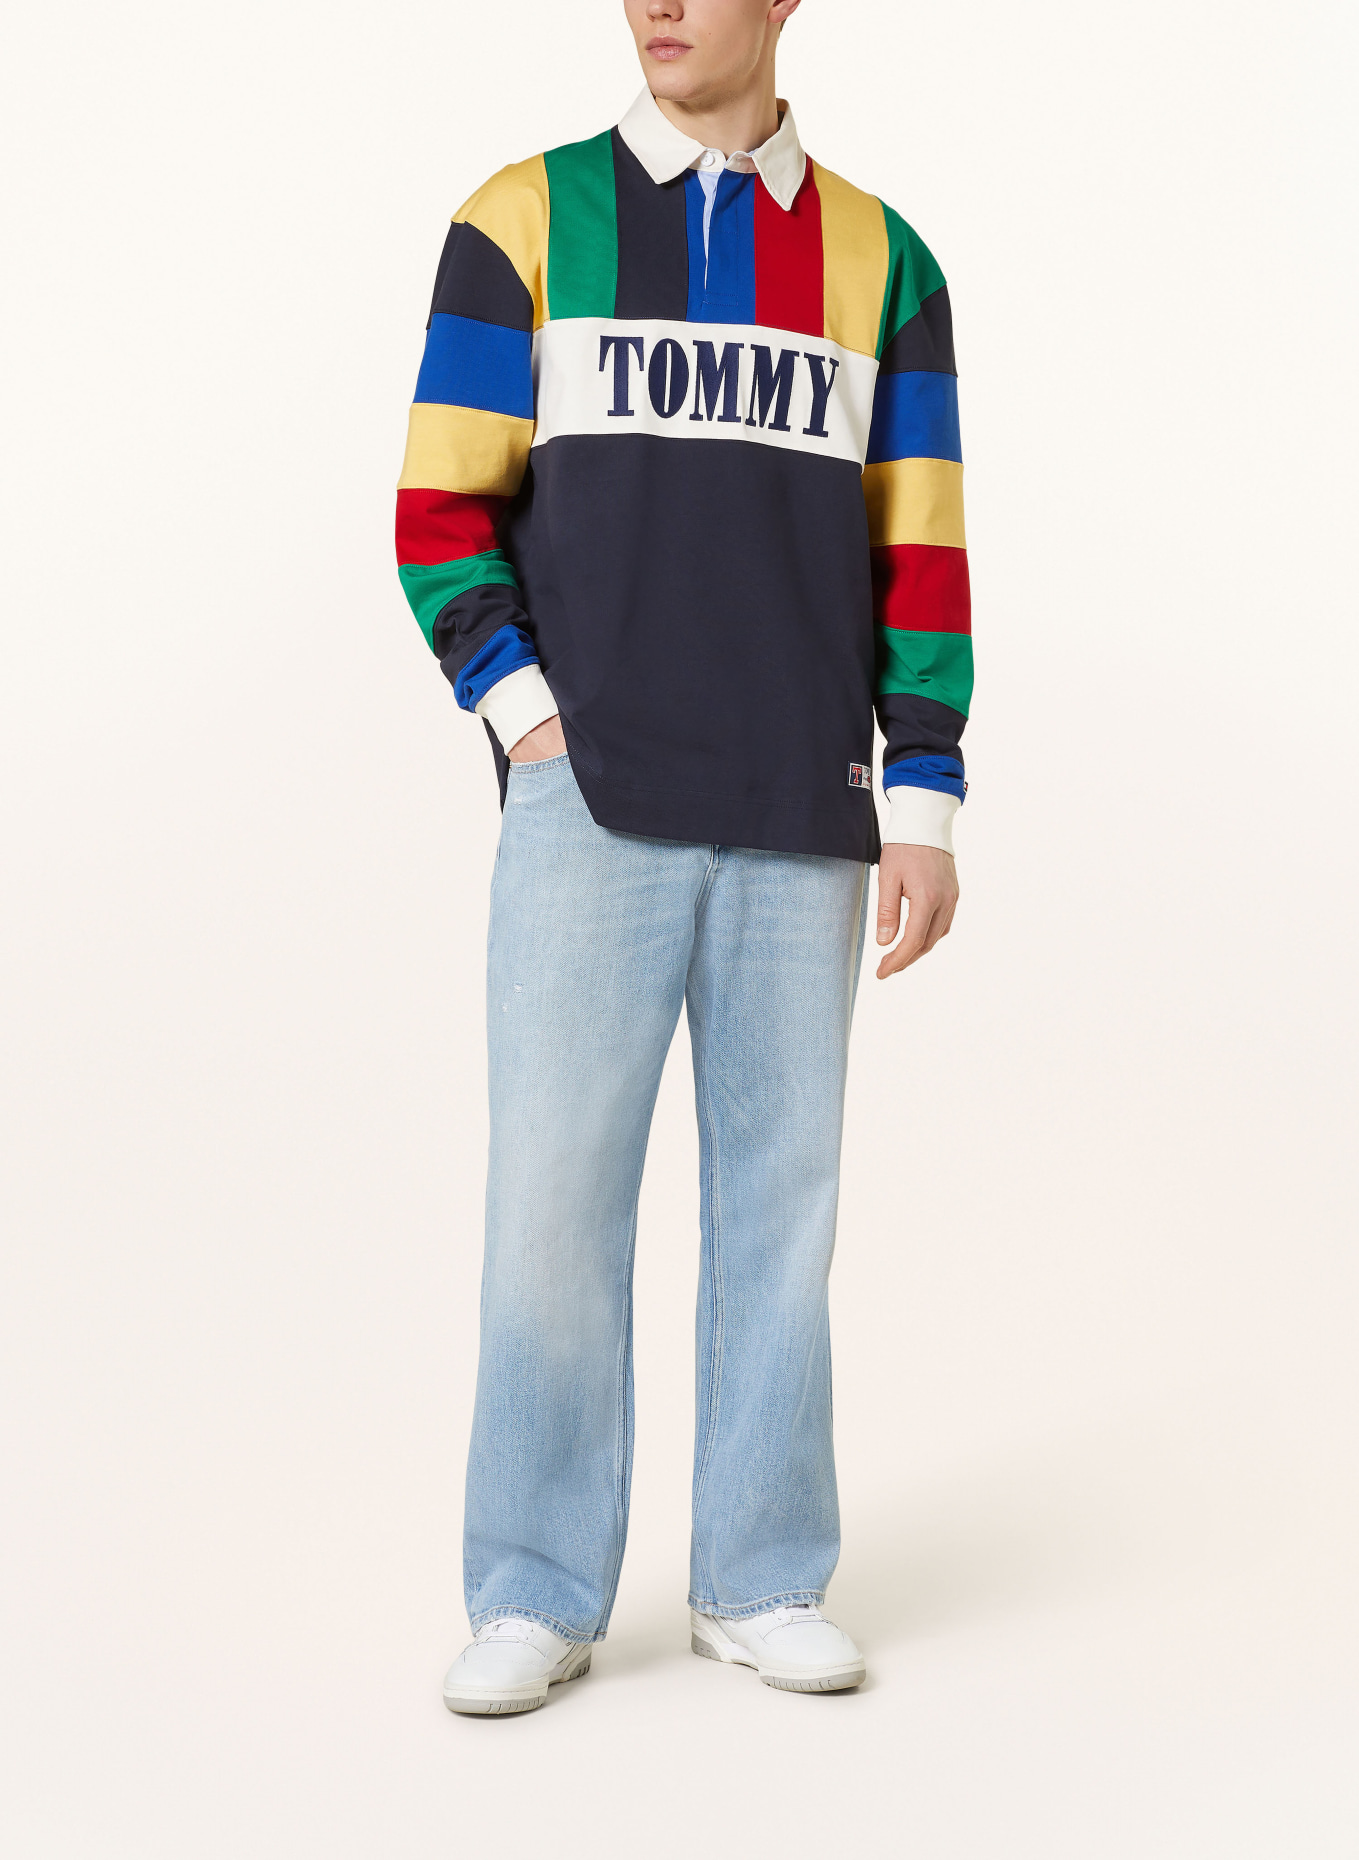 TOMMY JEANS Rugby shirt, Color: DARK BLUE/ YELLOW/ RED (Image 2)